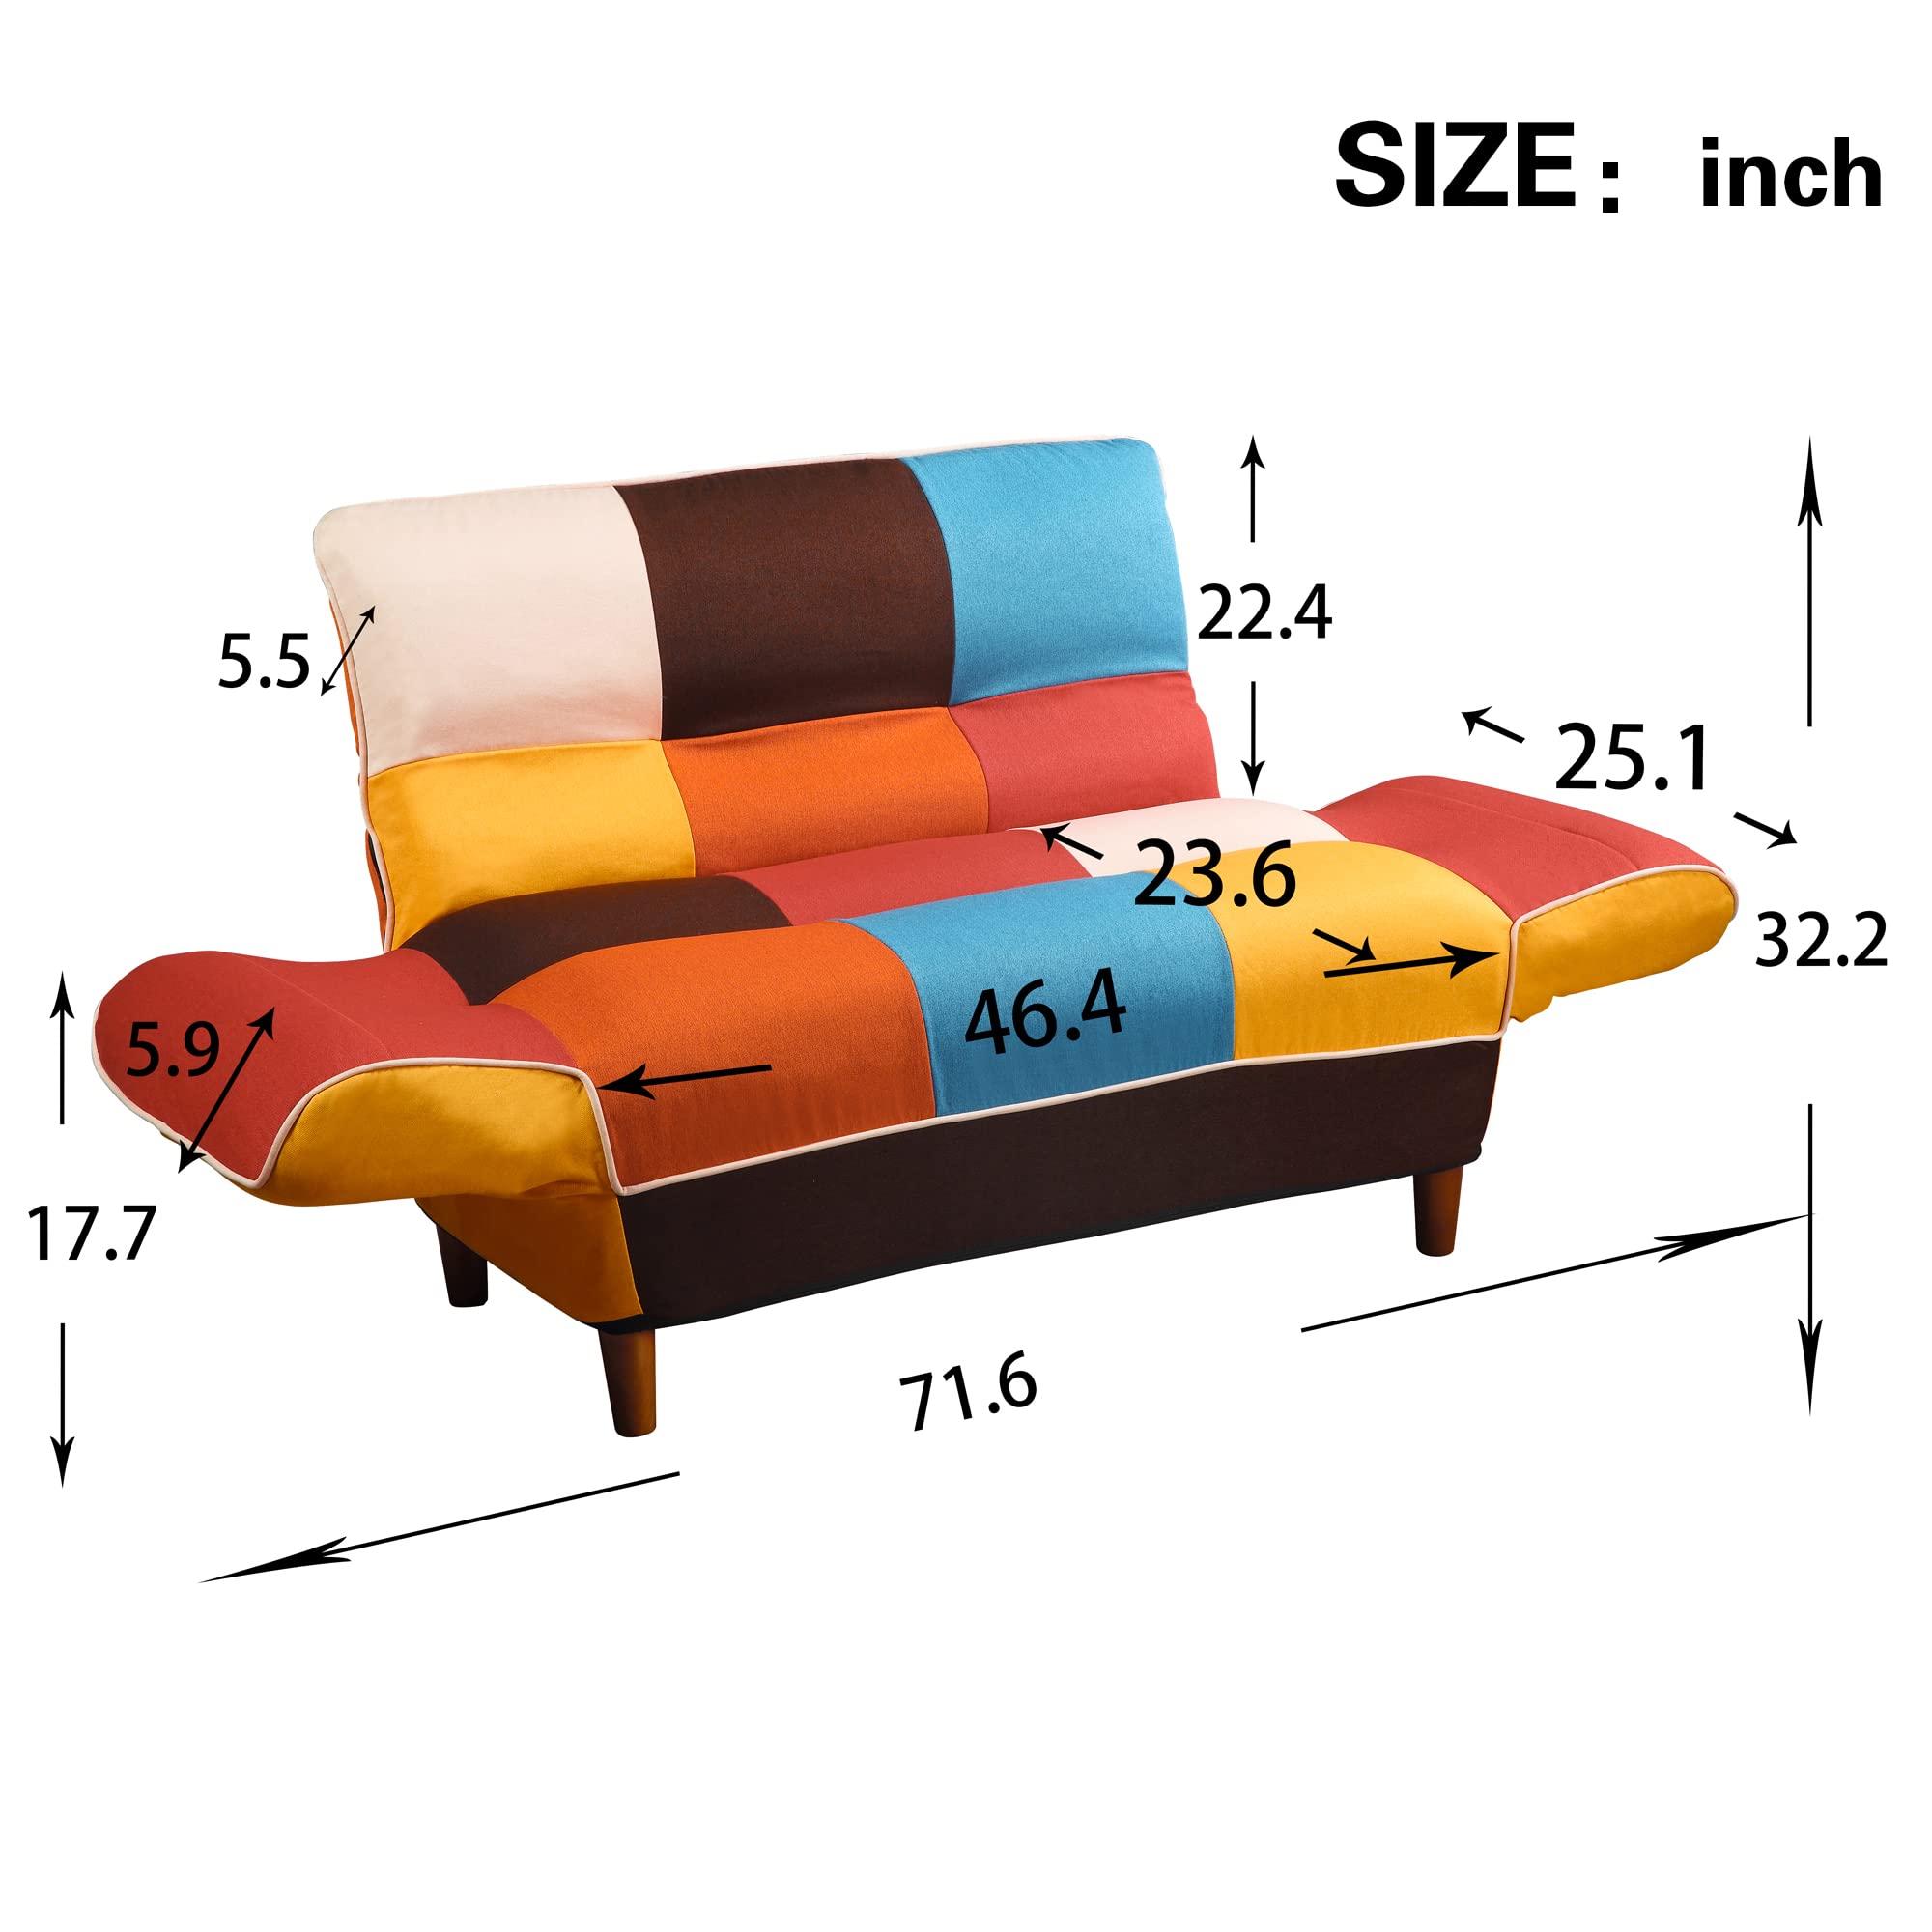 LUMISOL Modern Loveseat Sleeper Sofa Couch, Convertible Futon Sofa Couch with Adjustable Armrest and Backrest for Living Room, A